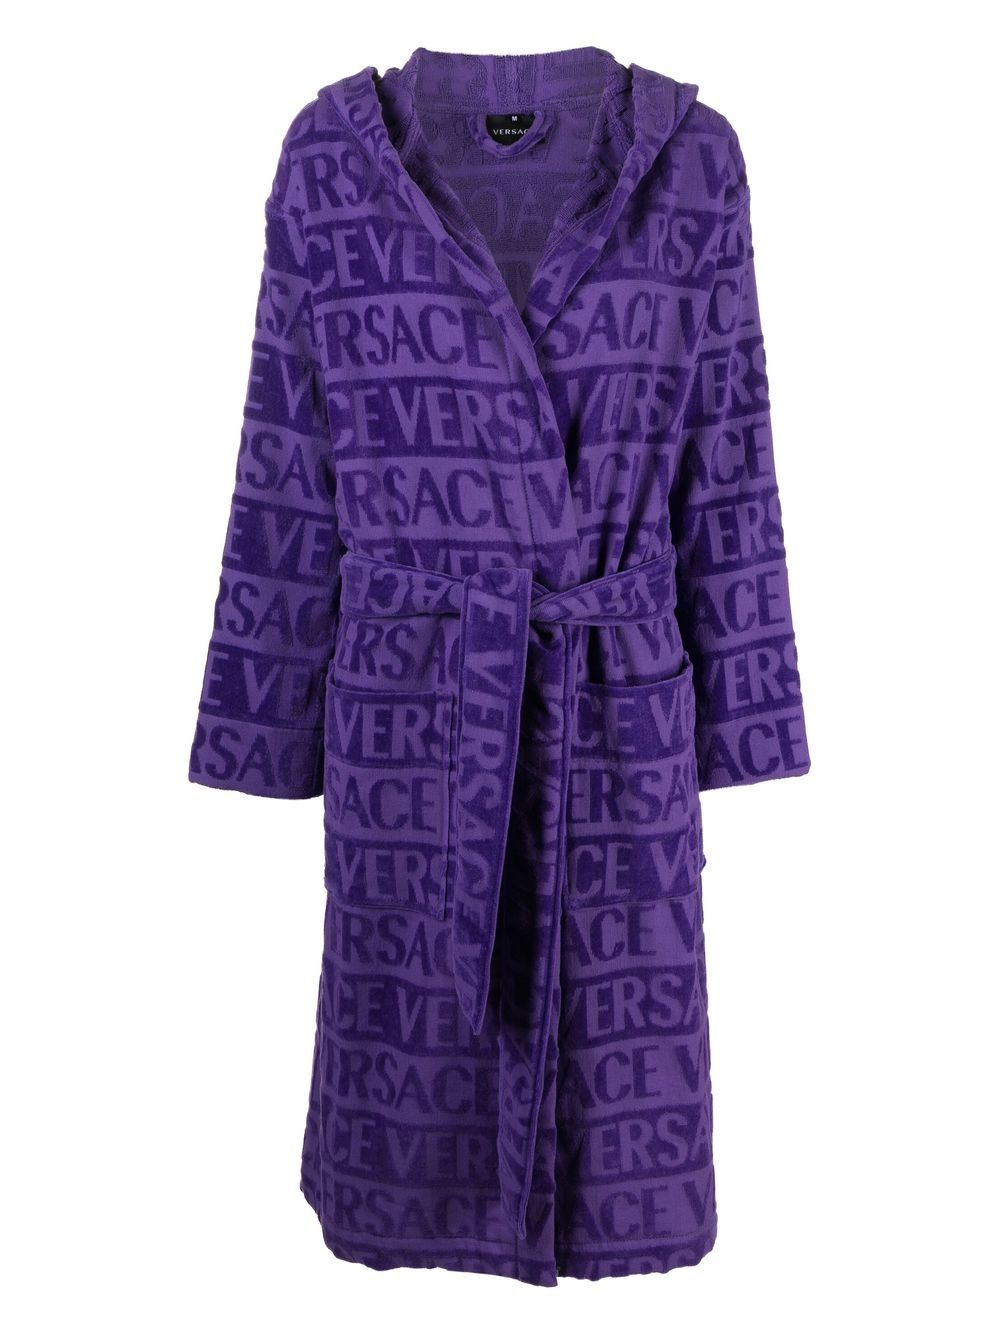 VERSACE LOGO TOWELLING BELTED ROBE